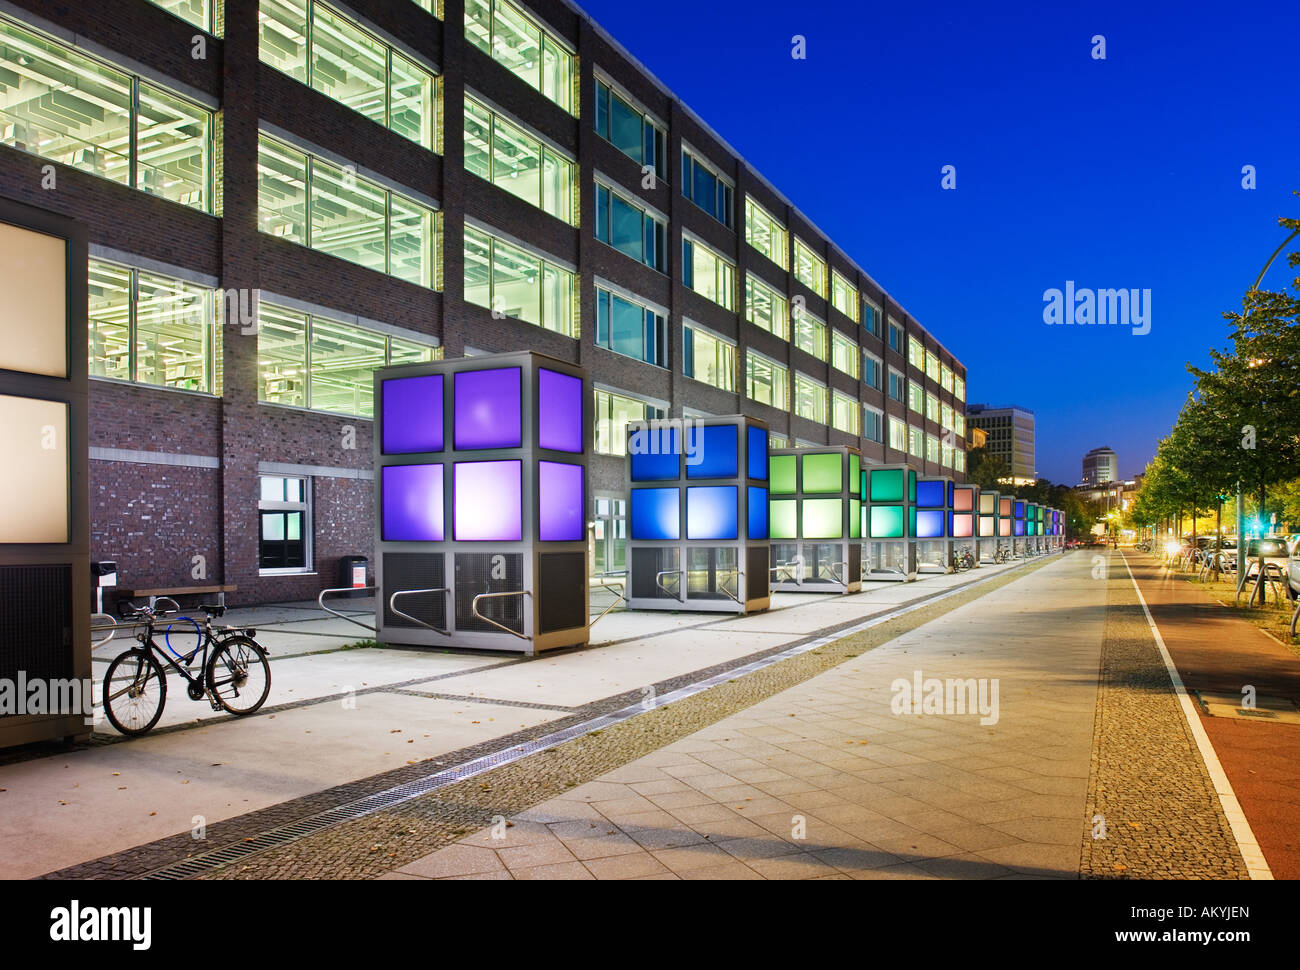 Common Library Of The Technical University Tu Berlin And